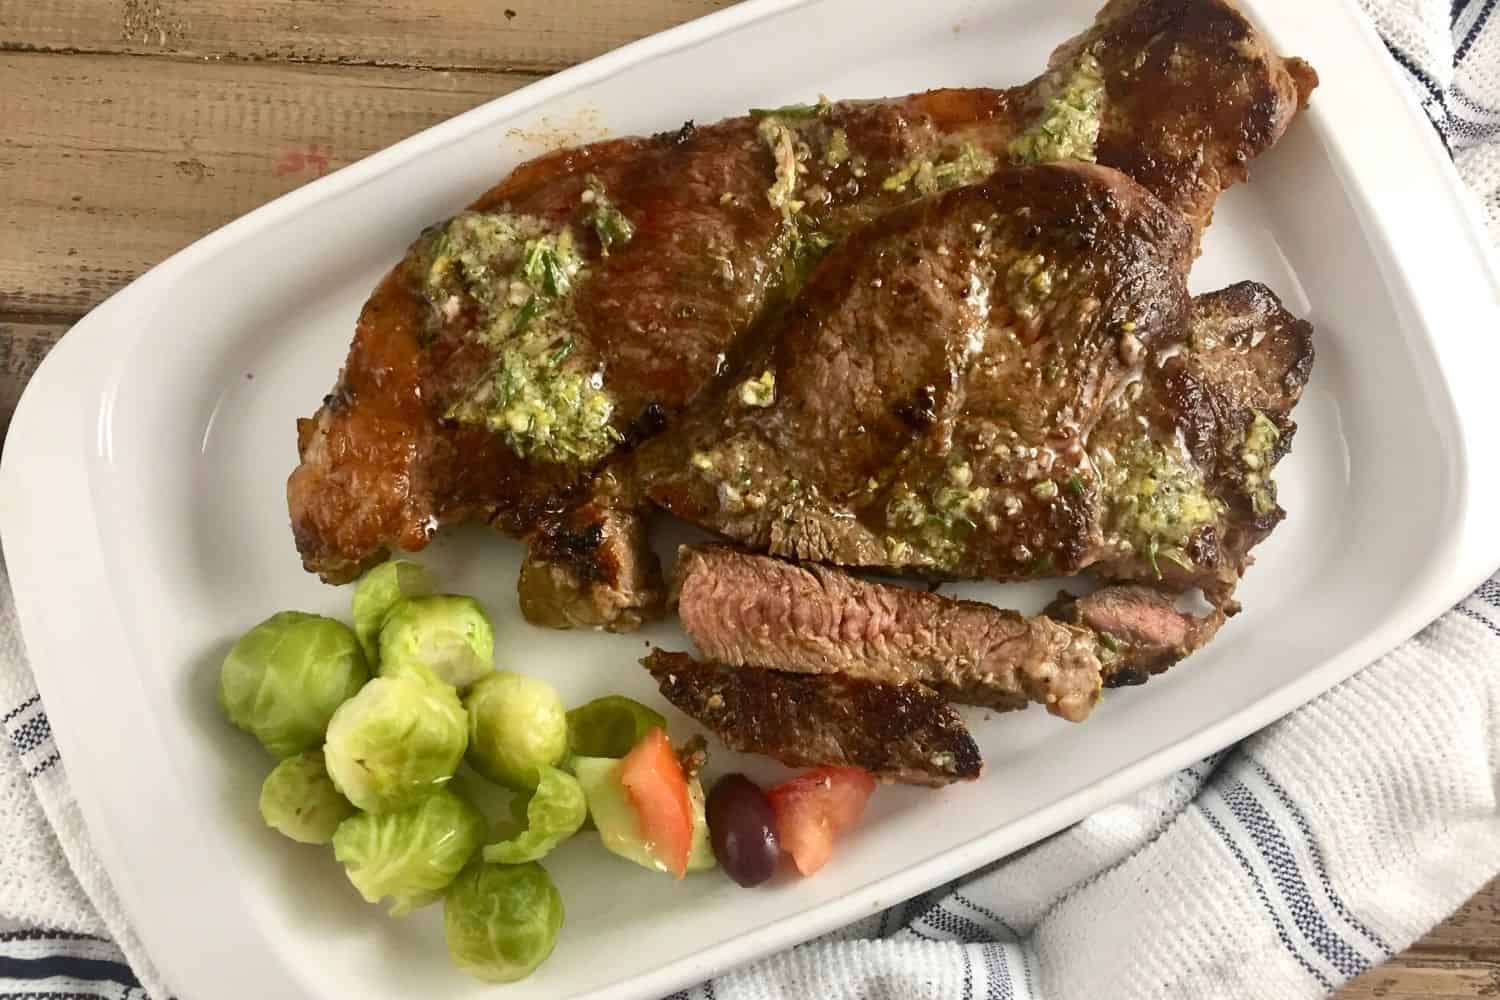 Pan-fried Rump steak with Rosemary and Garlic Paste